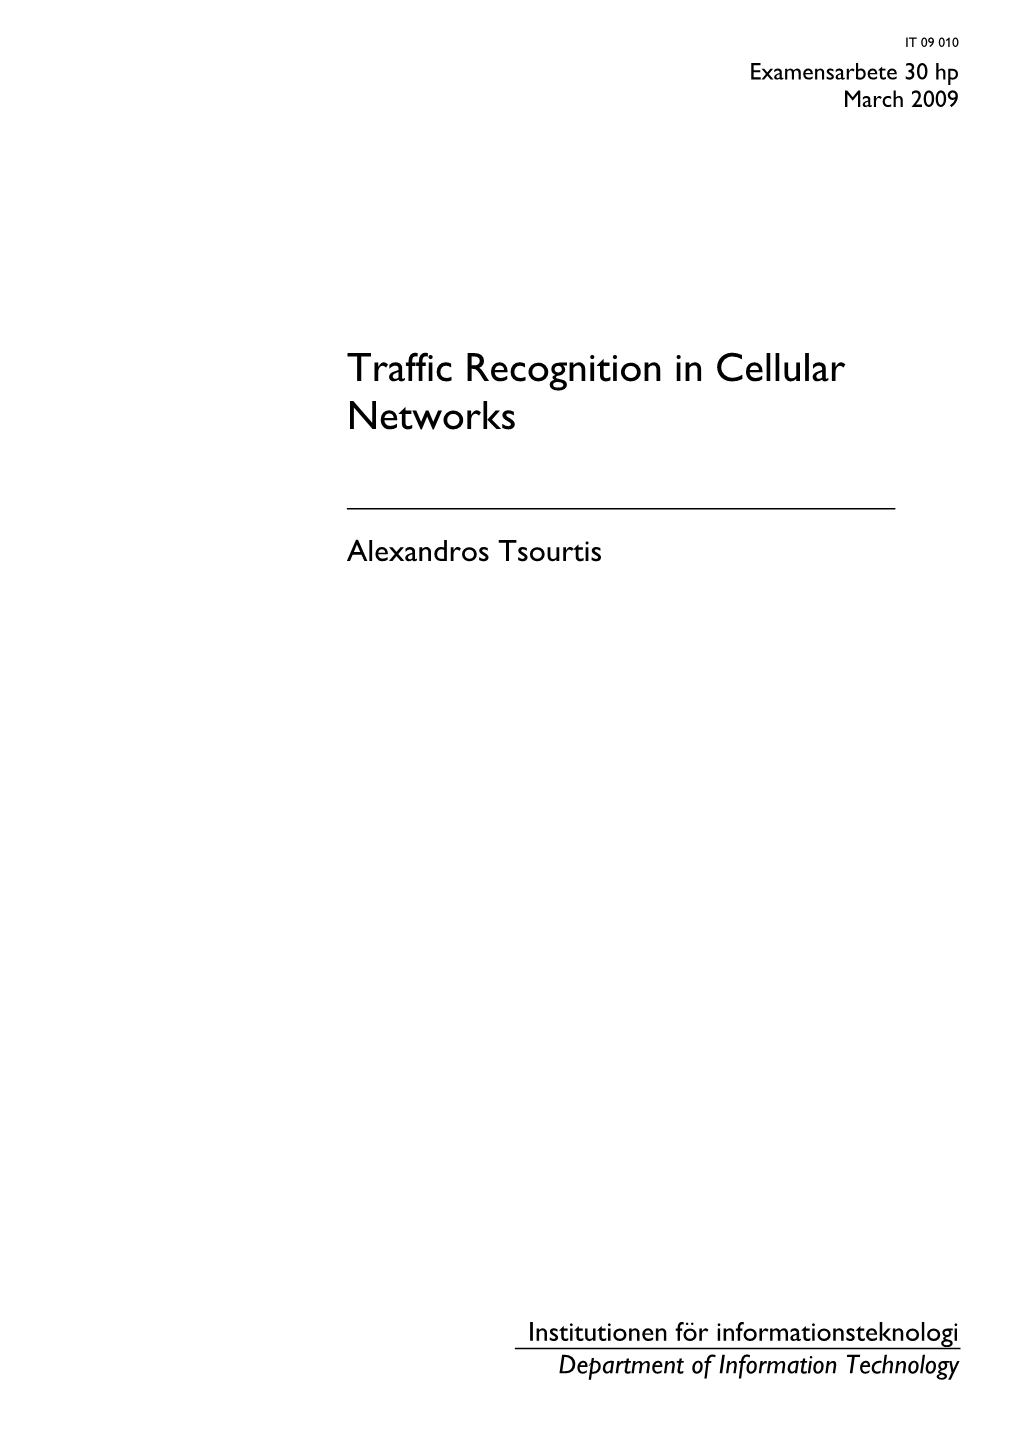 Traffic Recognition in Cellular Networks